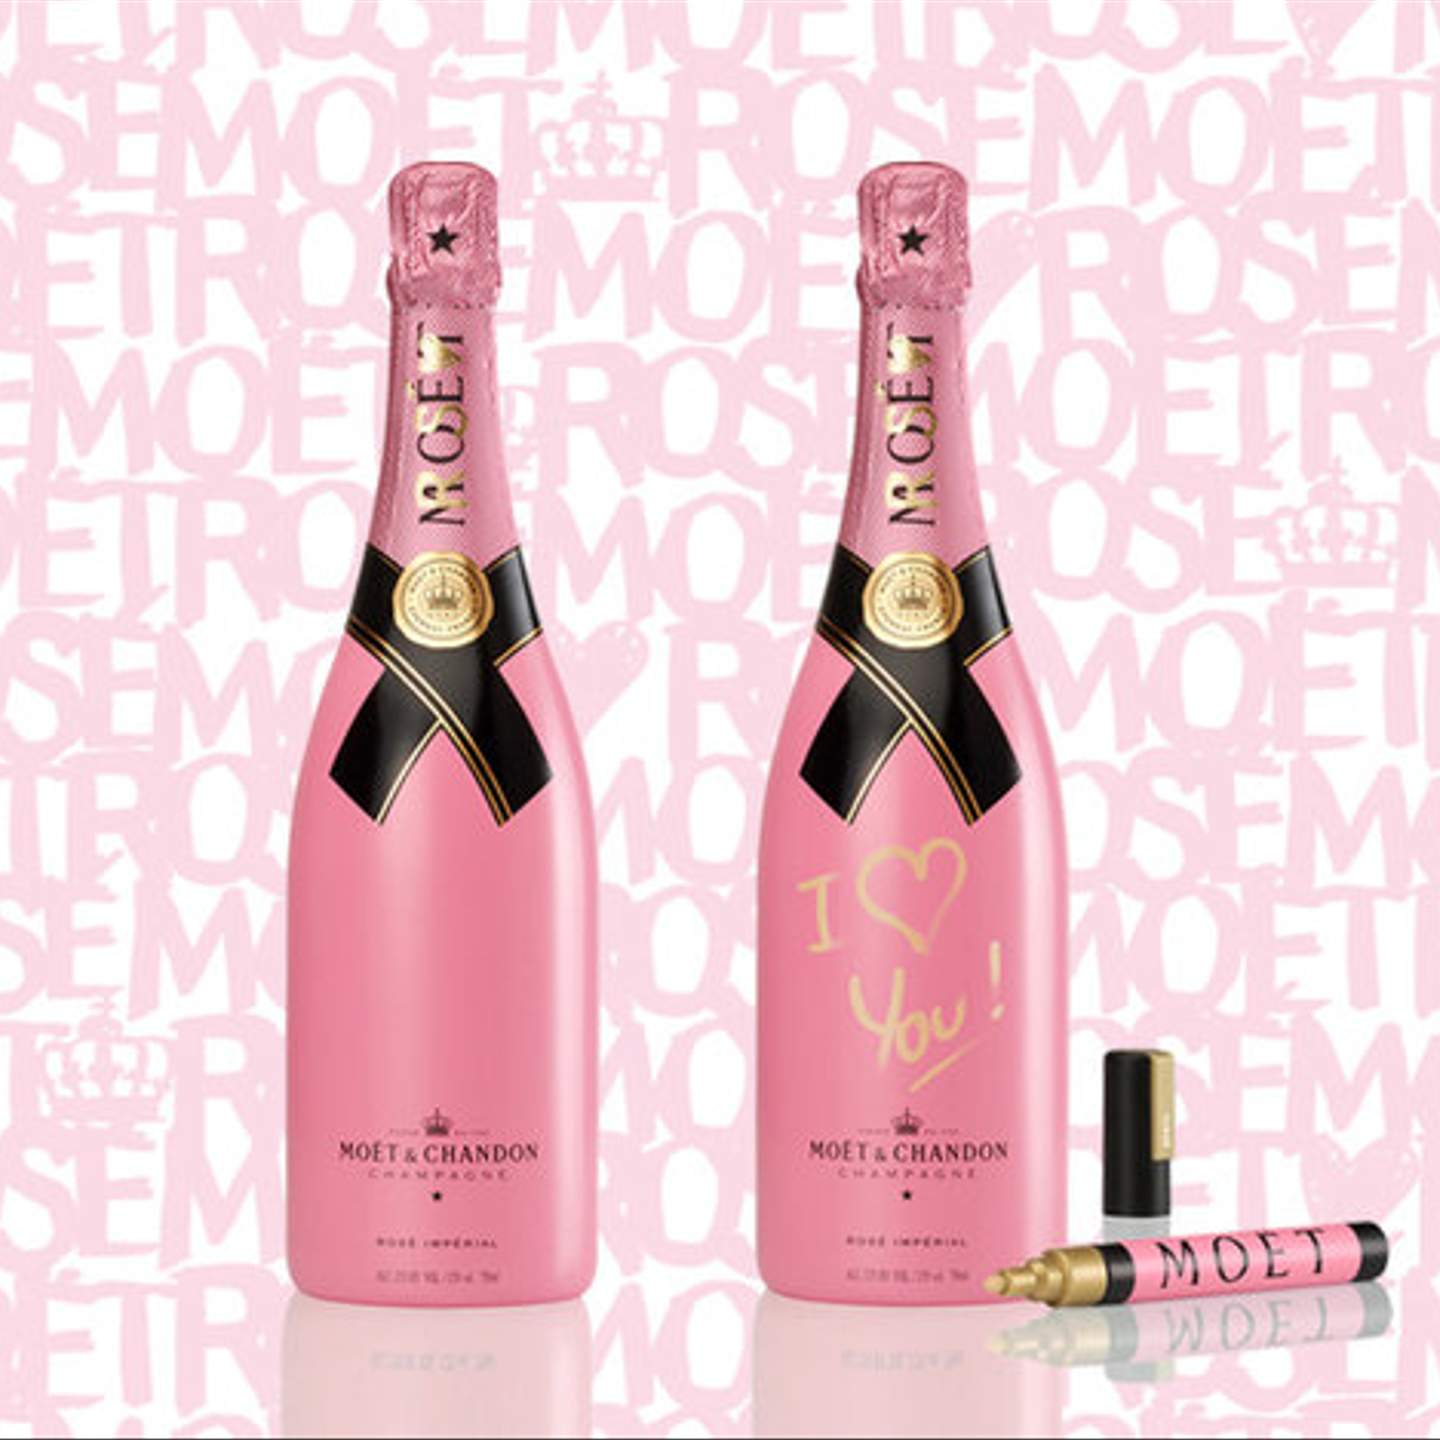 Win Moet and Chandon Pink Rose - Concrete Playground